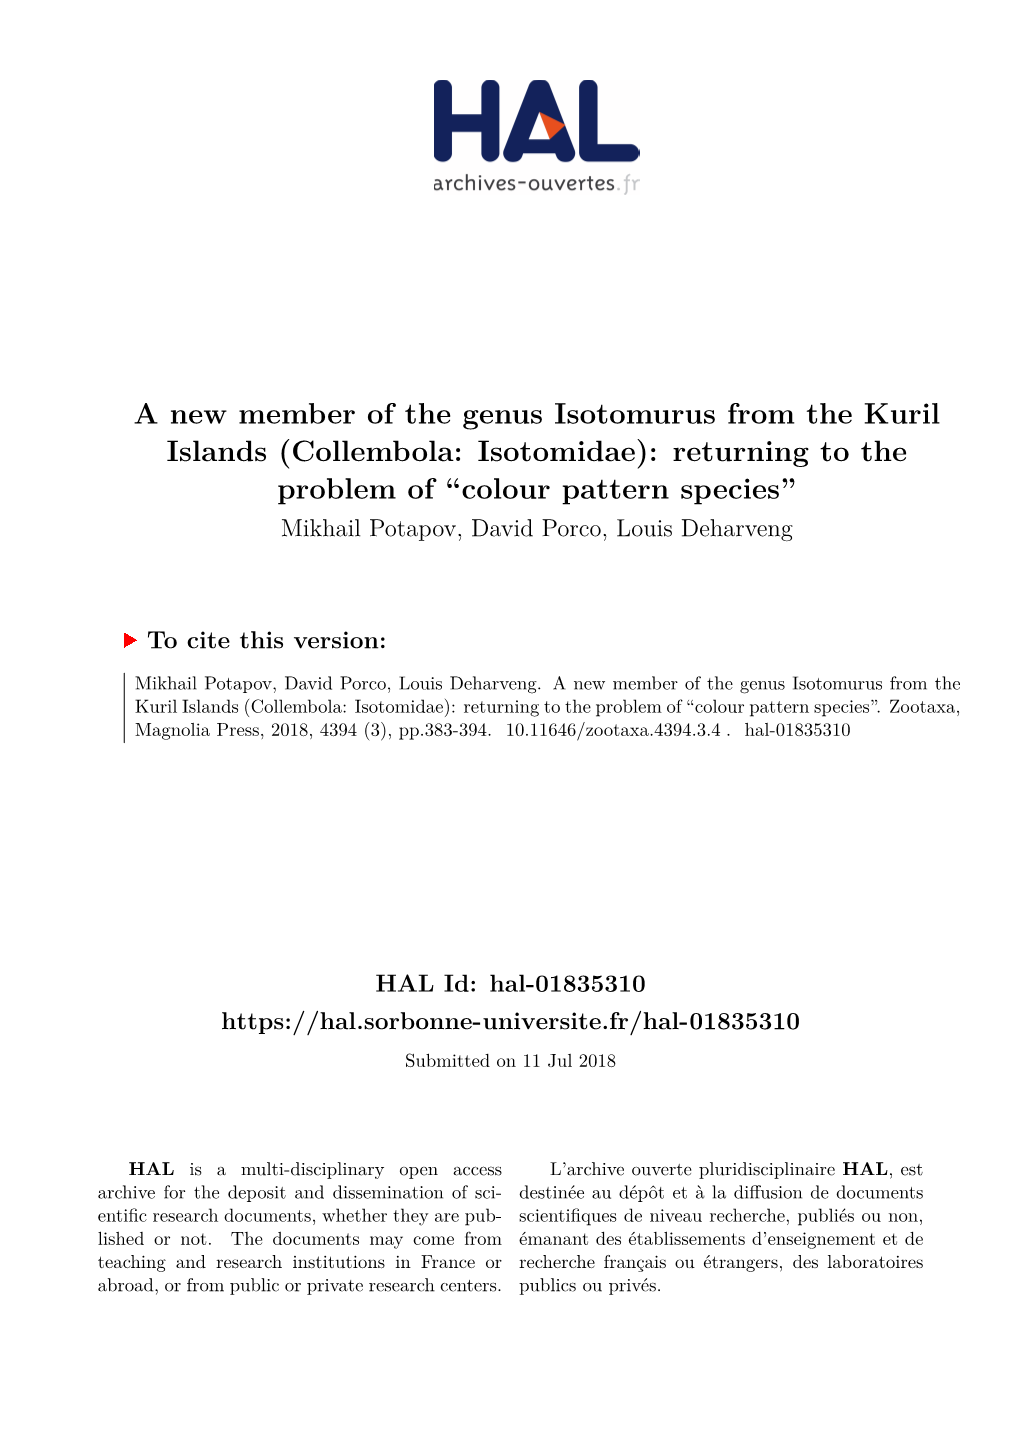 A New Member of the Genus Isotomurus from the Kuril Islands (Collembola: Isotomidae): Returning to the Problem of ``Colour Patte